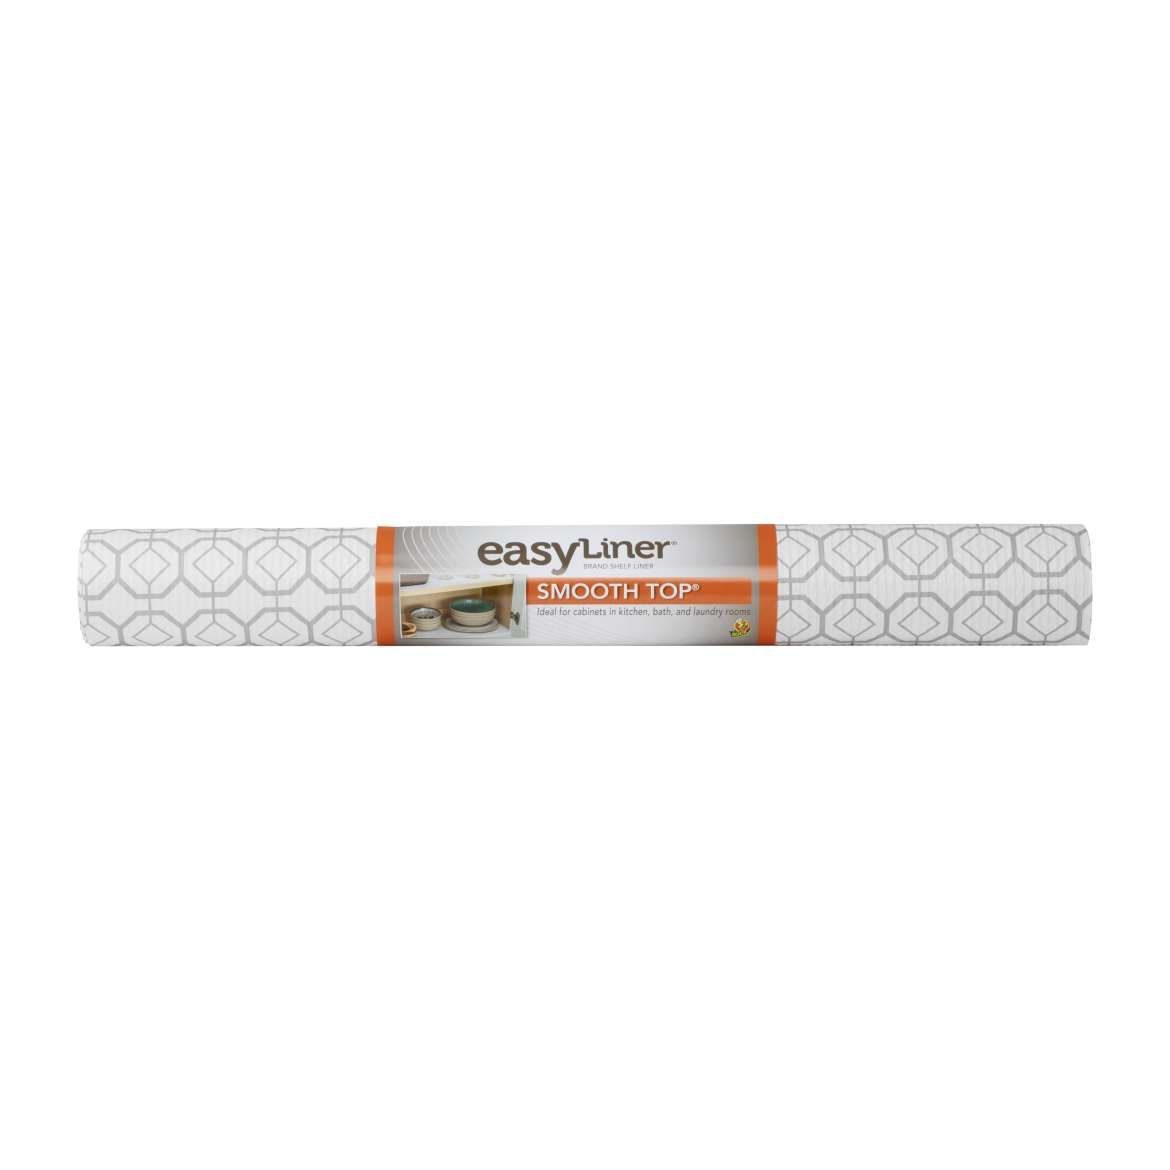 EasyLiner Smooth Top Shelf Liner, Gray, 20 in. x 6 ft. Roll 